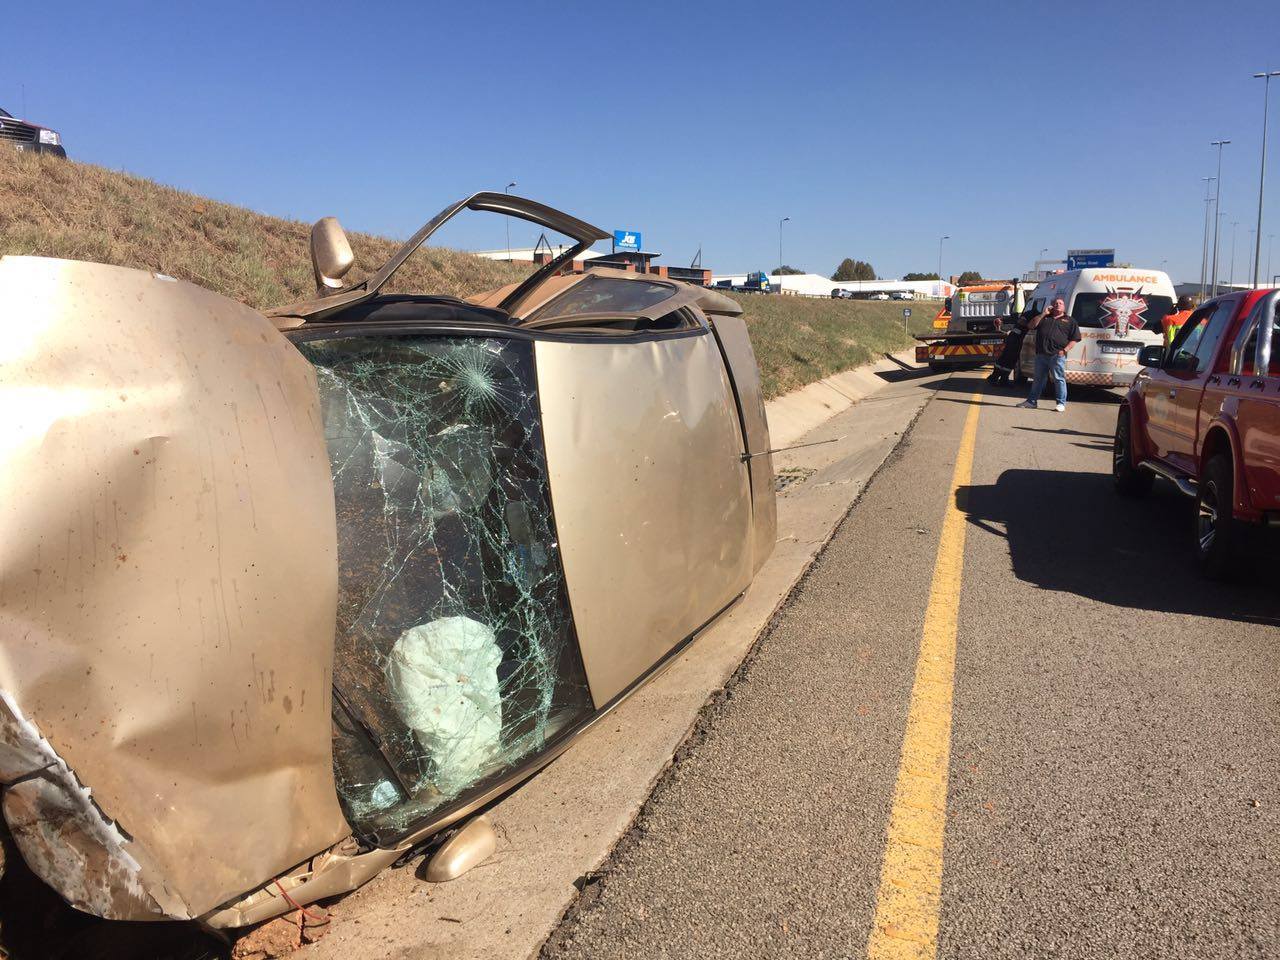 Driver ejected and critically injured in alleged rollover crash at speed